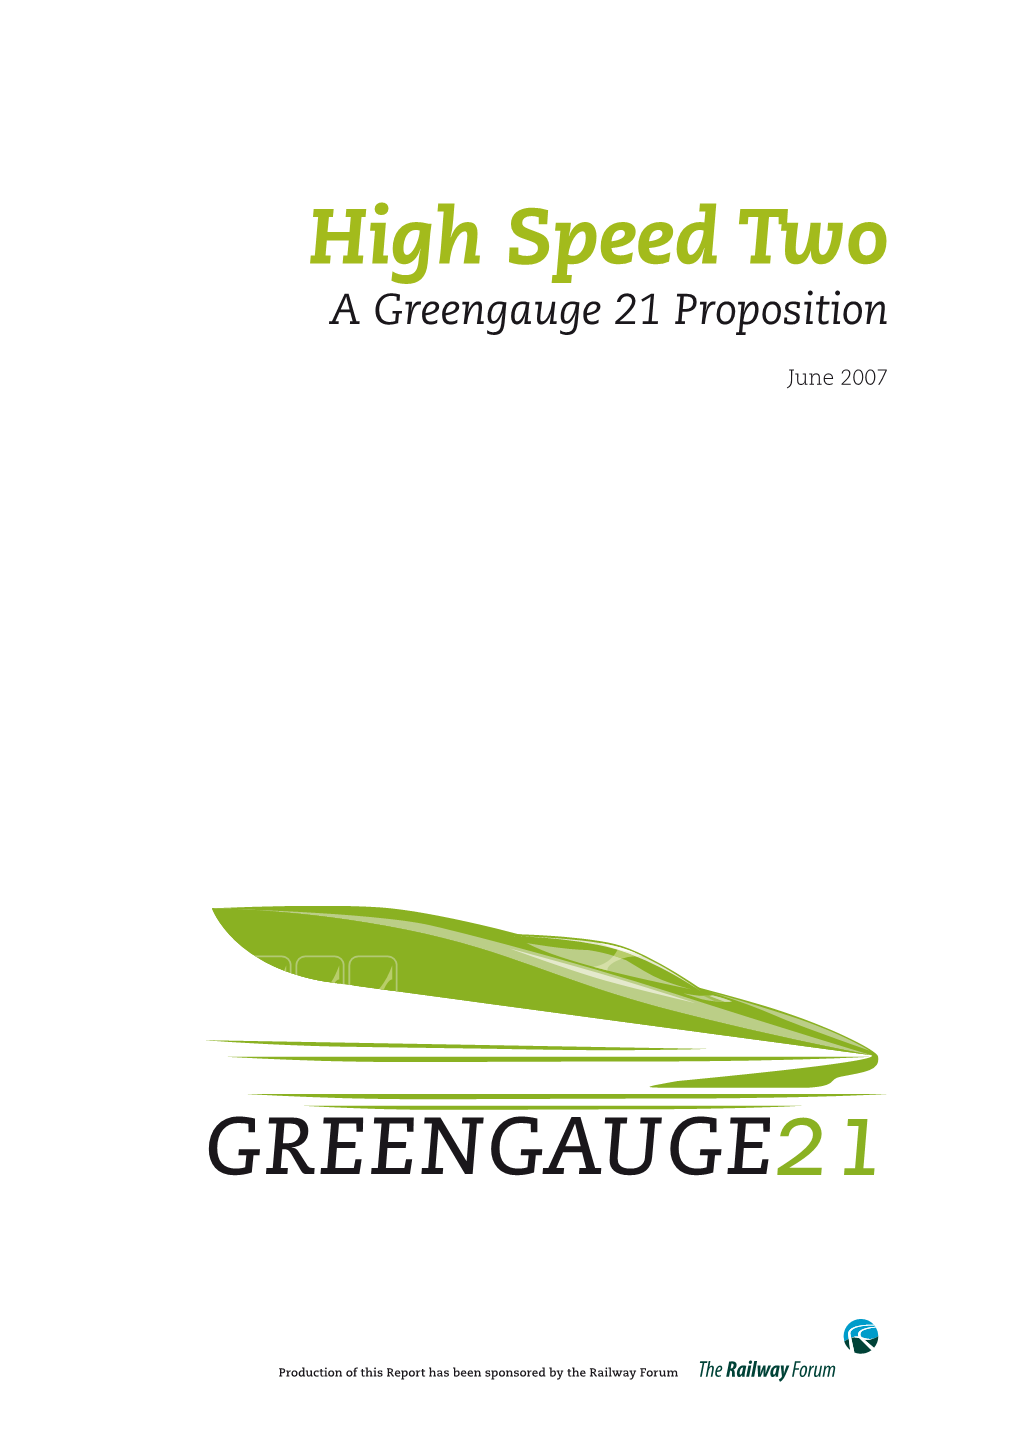 High Speed Two: a Greengauge 21 Proposition